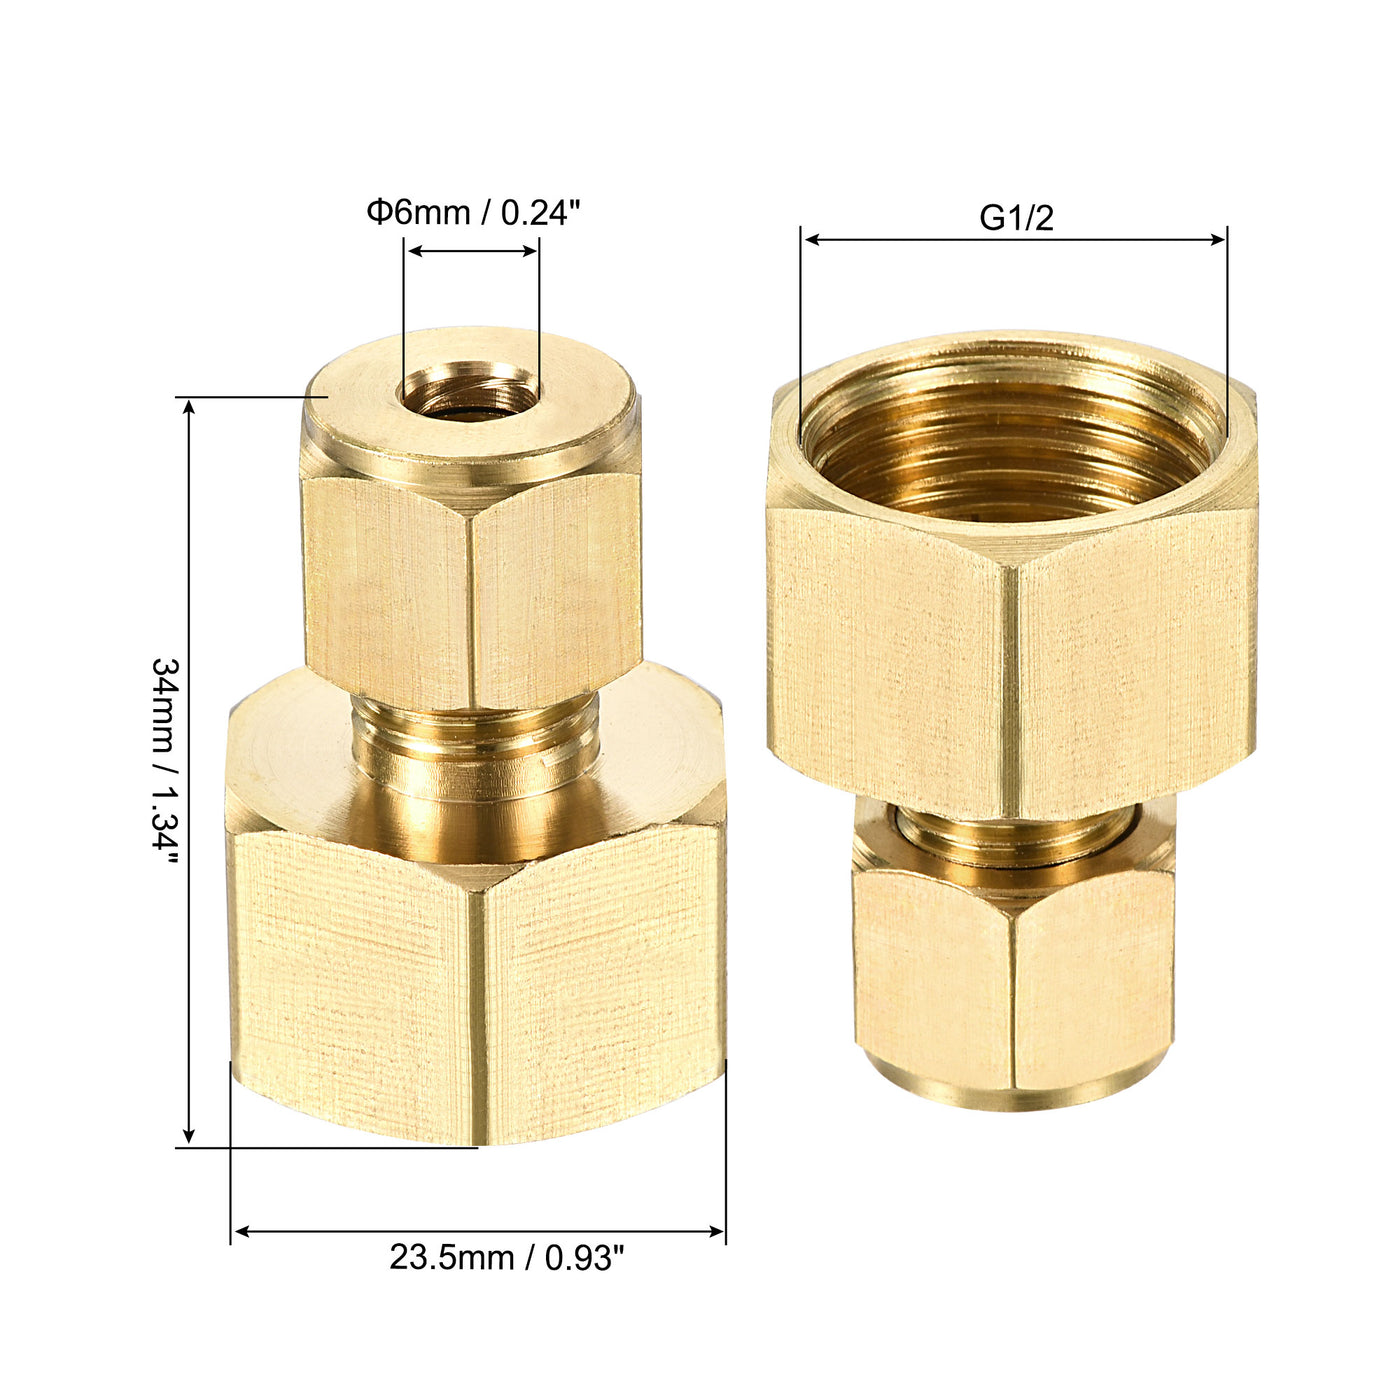 Uxcell Uxcell Compression Tube Fitting G1/2 Female Thread x 10mm Tube OD Straight Coupling Adapter Brass, 2pcs